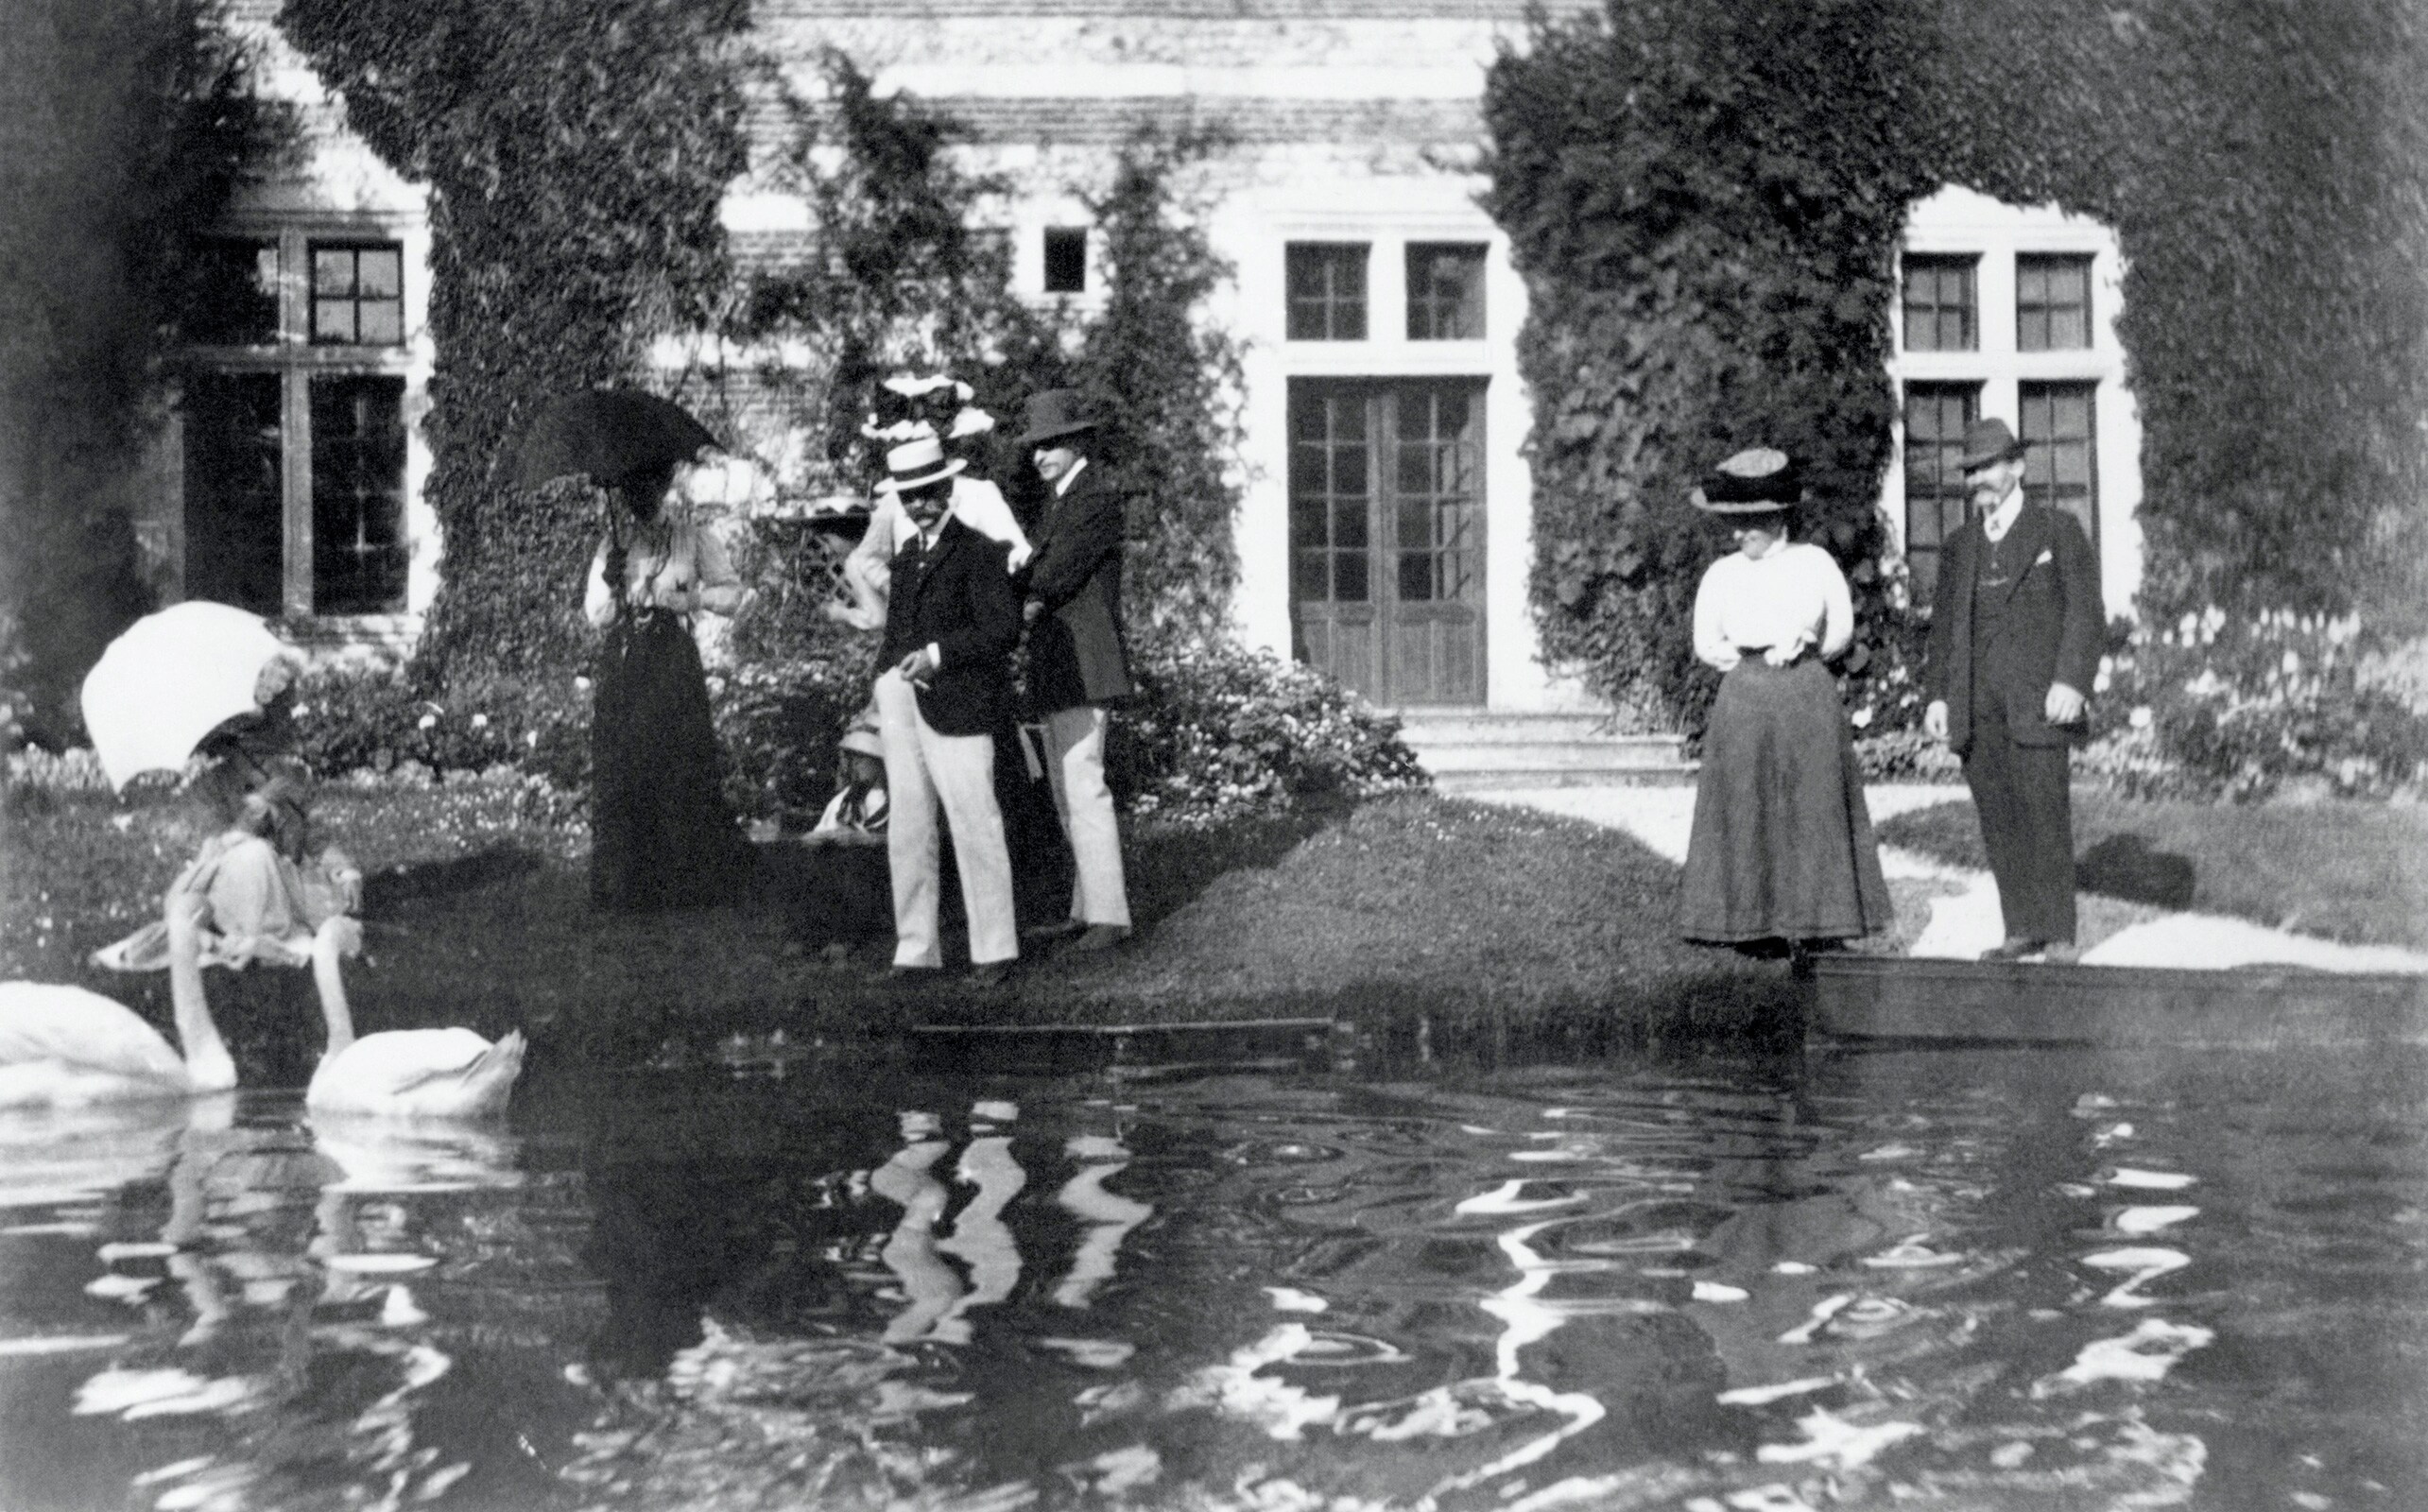 In front of the château de Mirville, Baron Pierre de COUBERTIN, his brother-in-law Gaëtan de NAVACELLE, Countess and Count Maurice de MADRE.